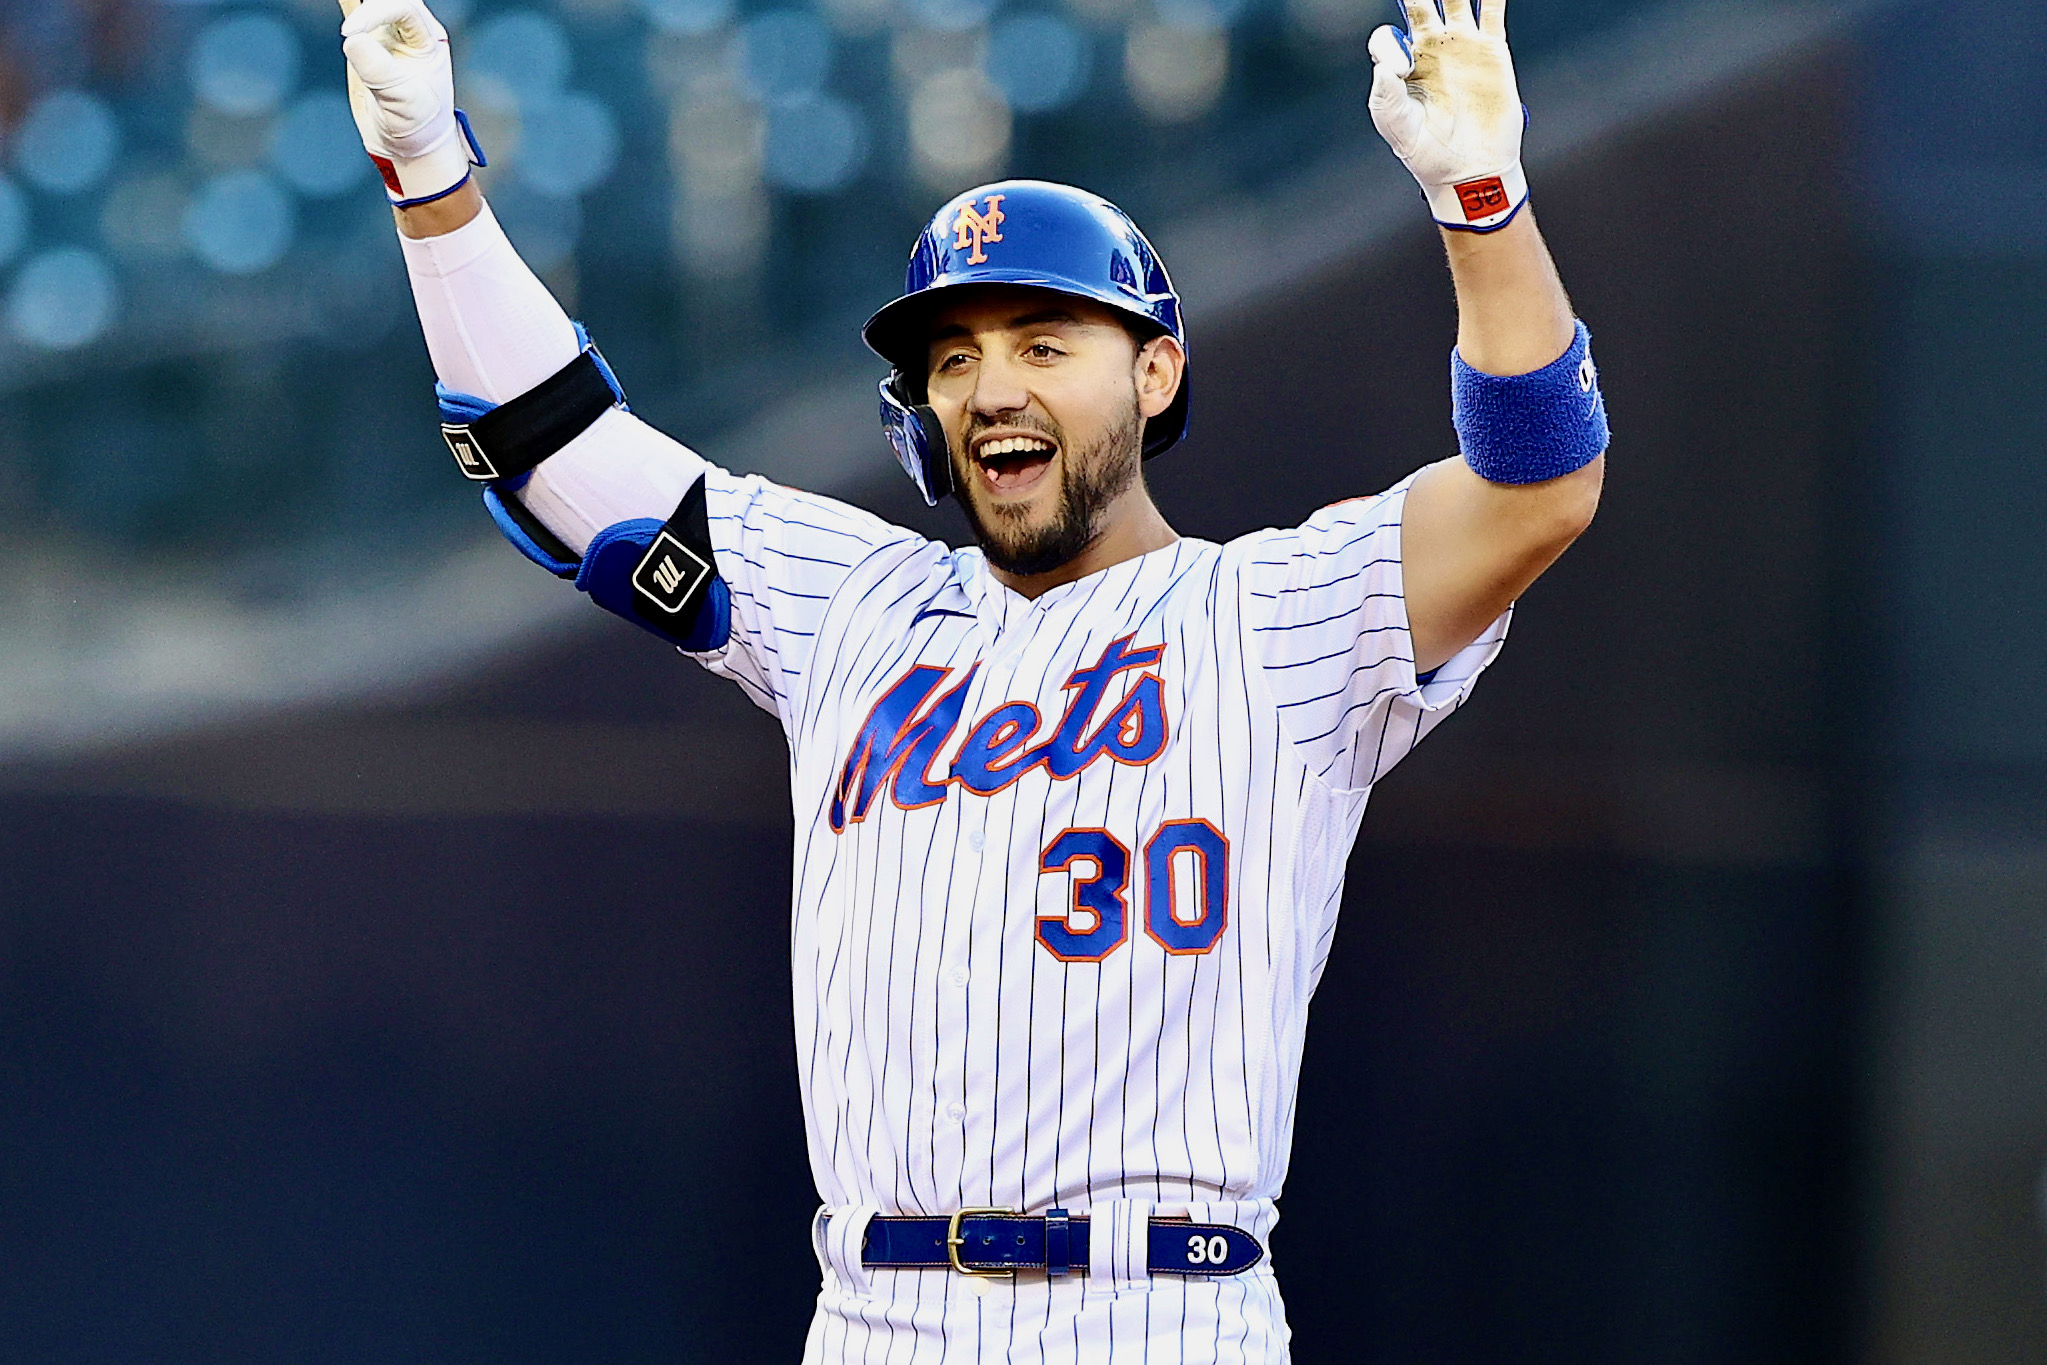 Mets To Wear 1986 Uniforms For All Sunday Home Games - Metsmerized Online